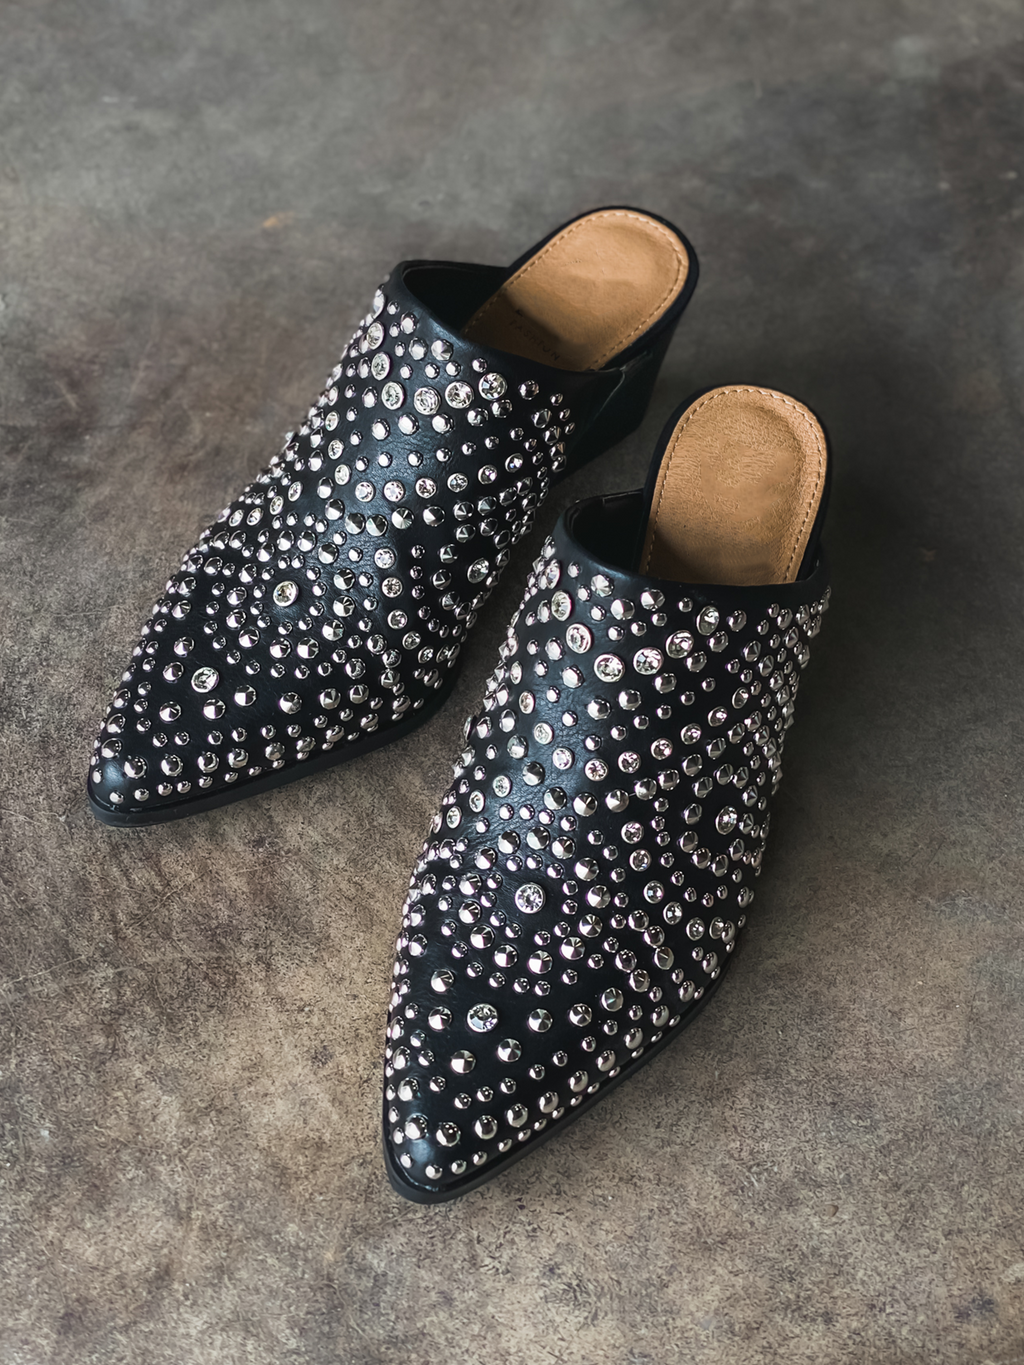 Hazel Studded Mule in Black - Final Sale - Stitch And Feather